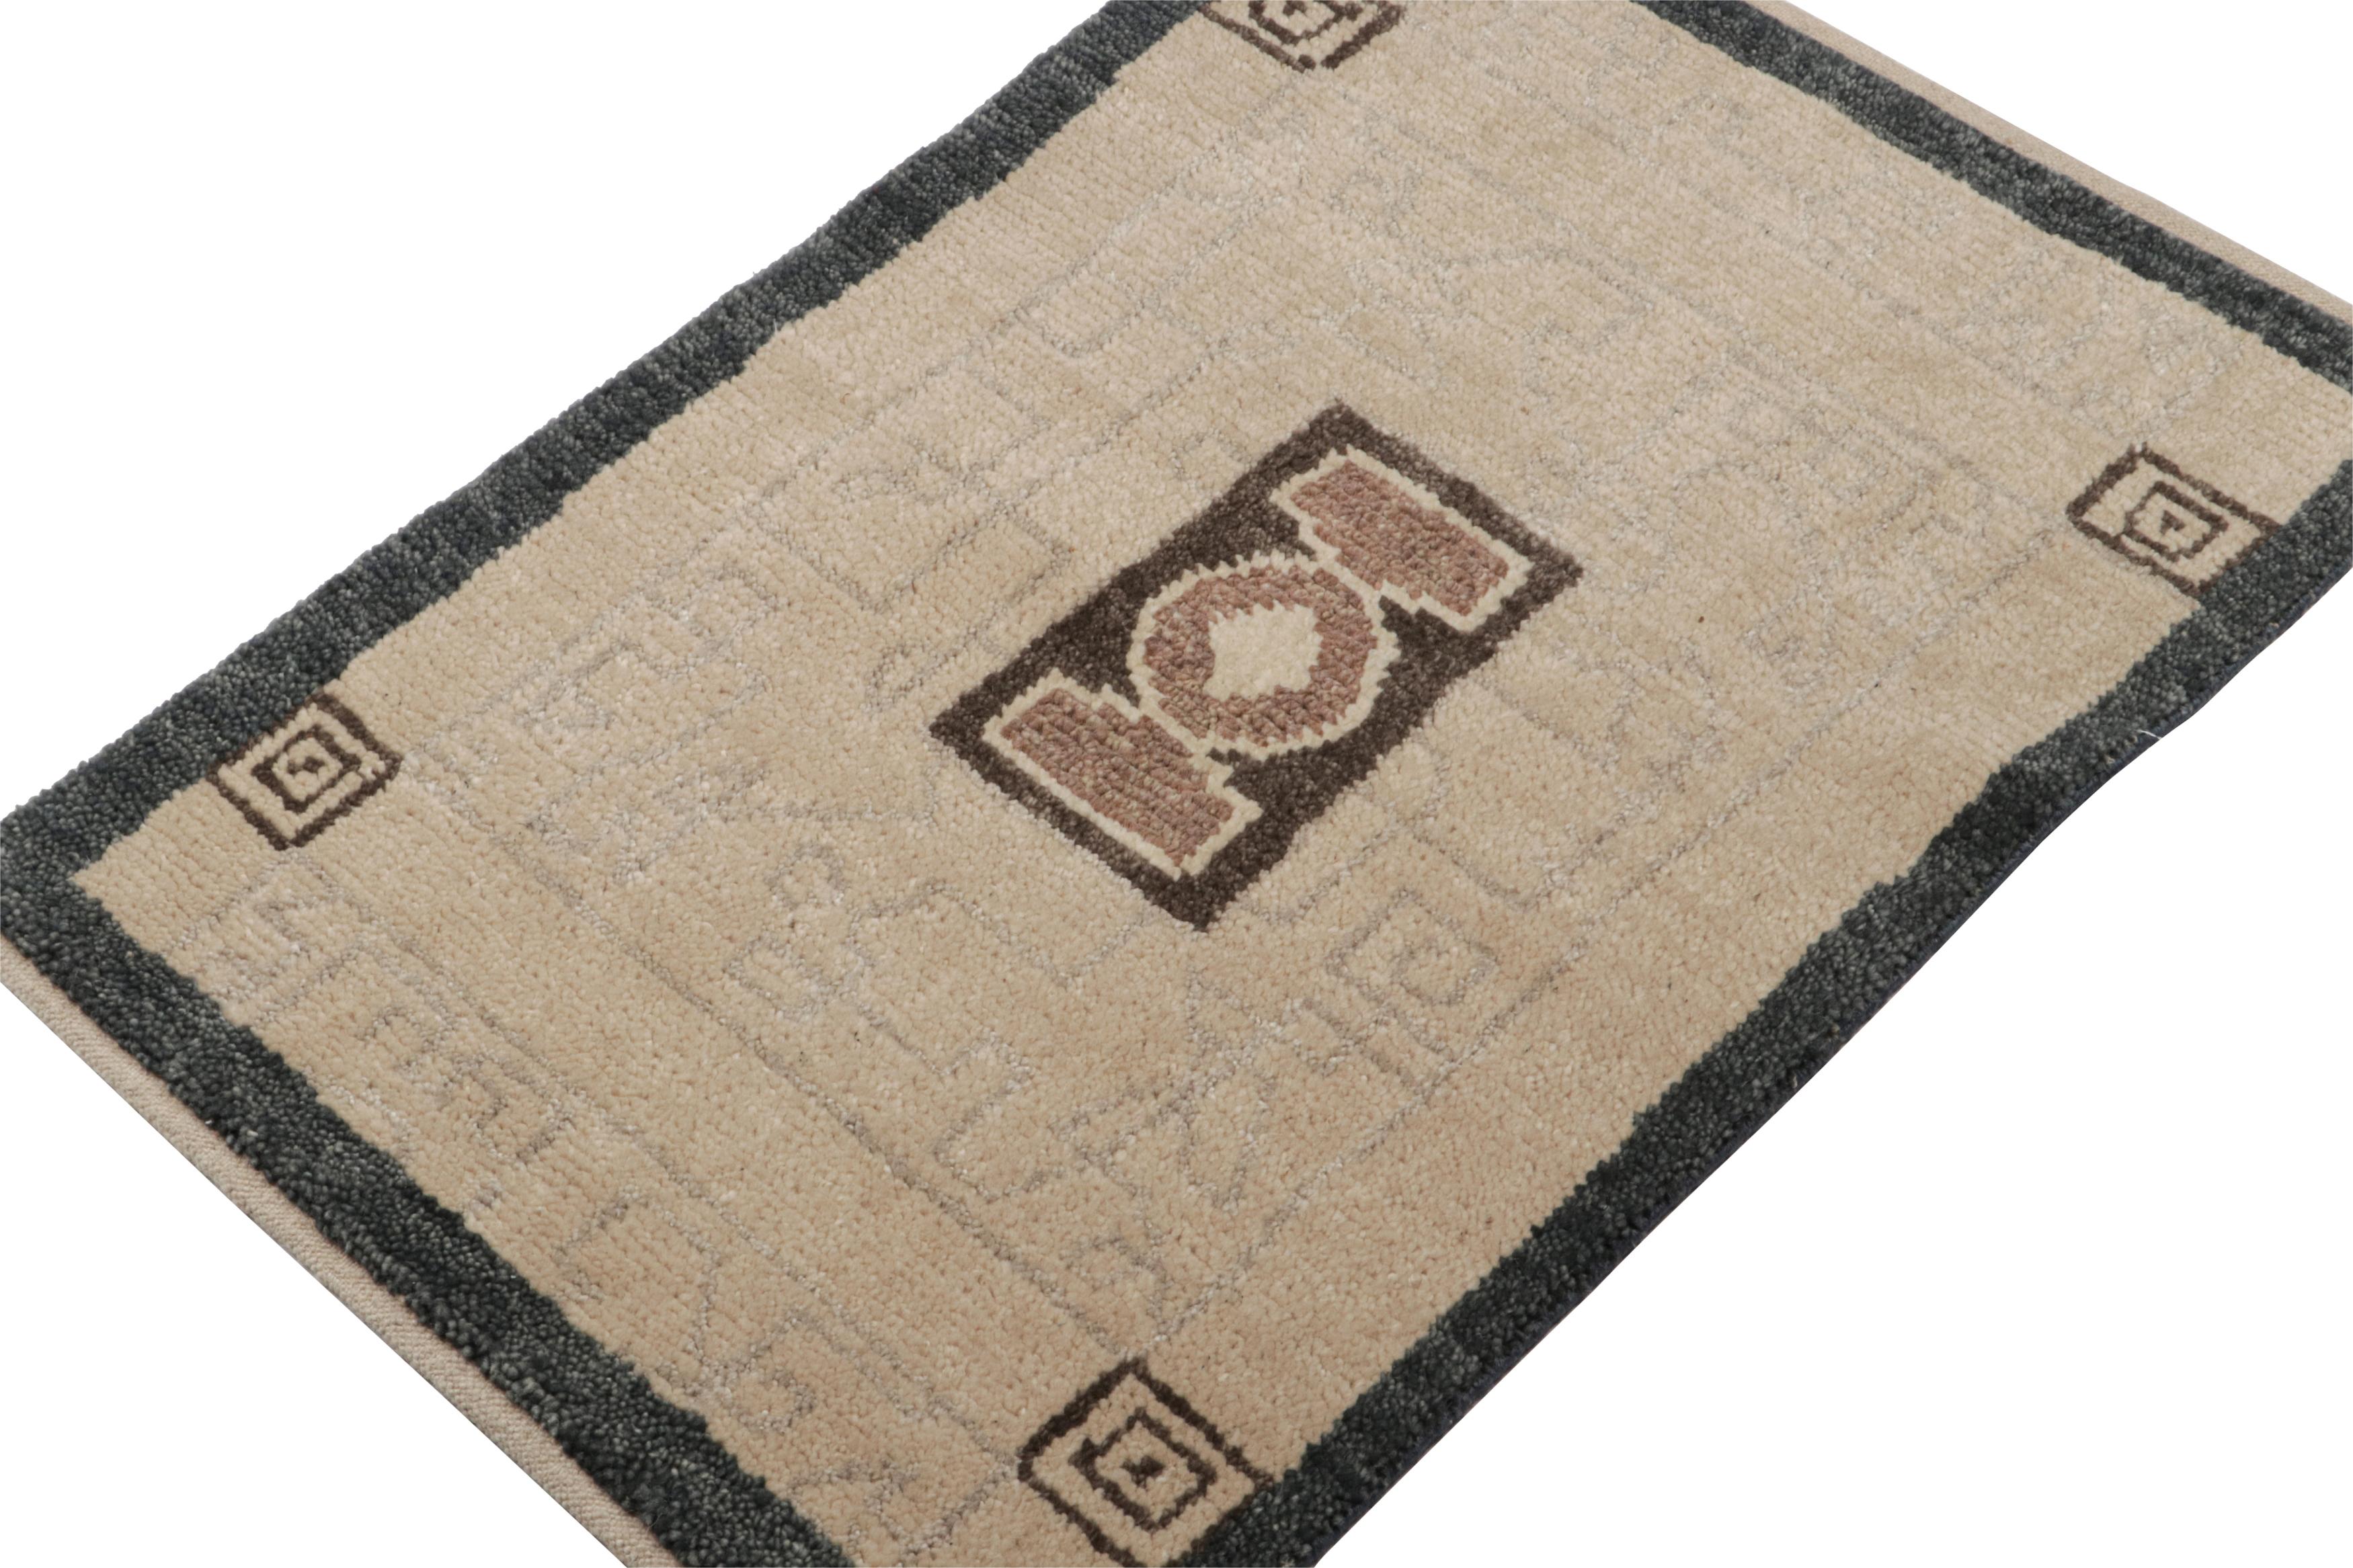 This 2x3 rug is an exciting new addition to the Art Deco collection by Rug & Kilim.  

On the Design: 

Hand-knotted in wool, this contemporary gift sized rug is inspired by French Art Deco rug style of the 1920s. Its geometric pattern enjoys a play